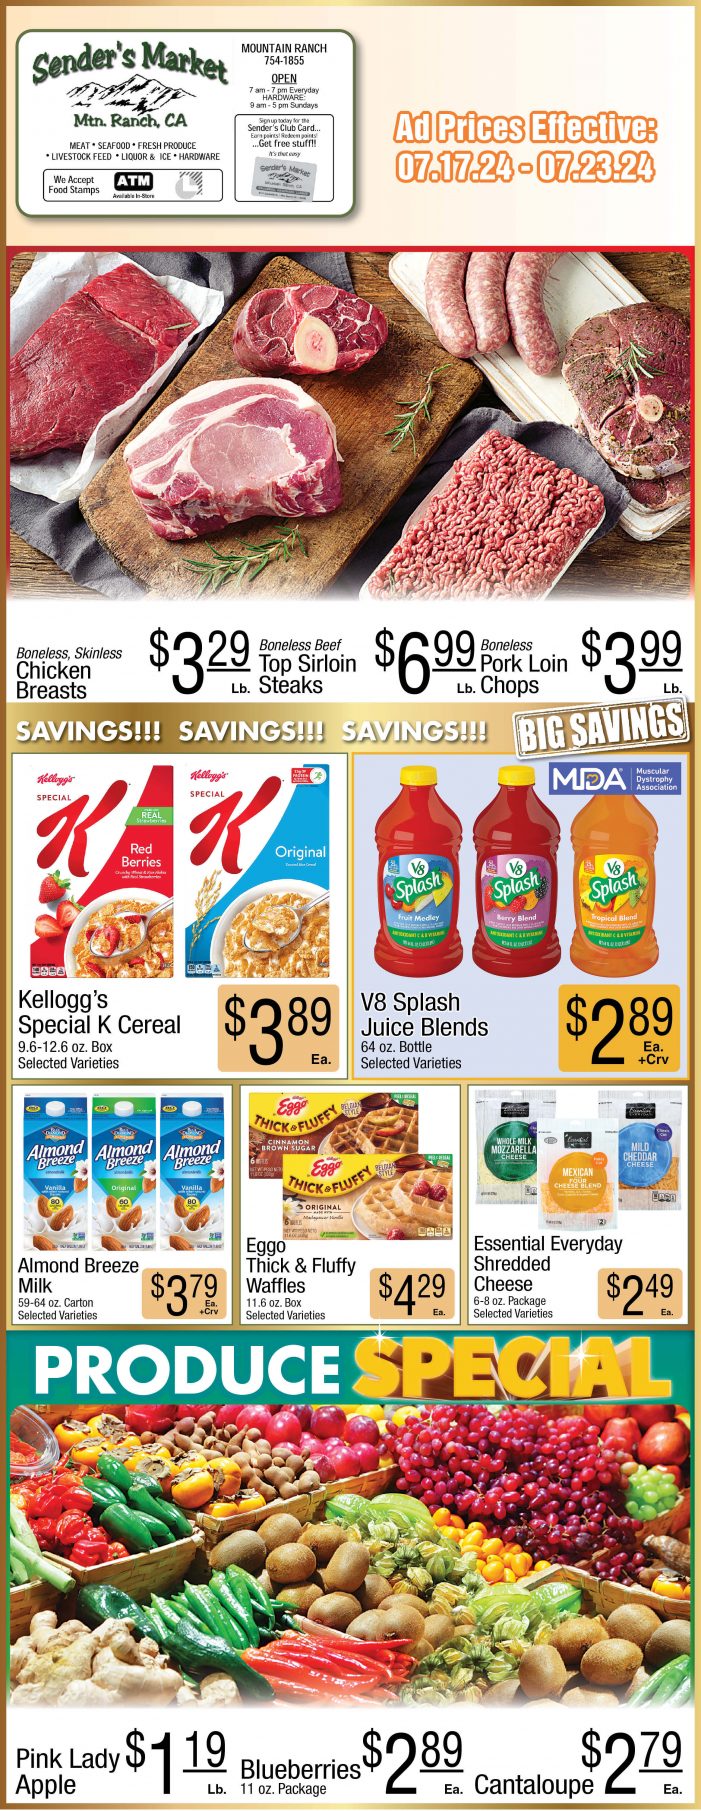 Sender’s Market Weekly Ad & Grocery Specials Through July 23rd! Shop Local & Save!!